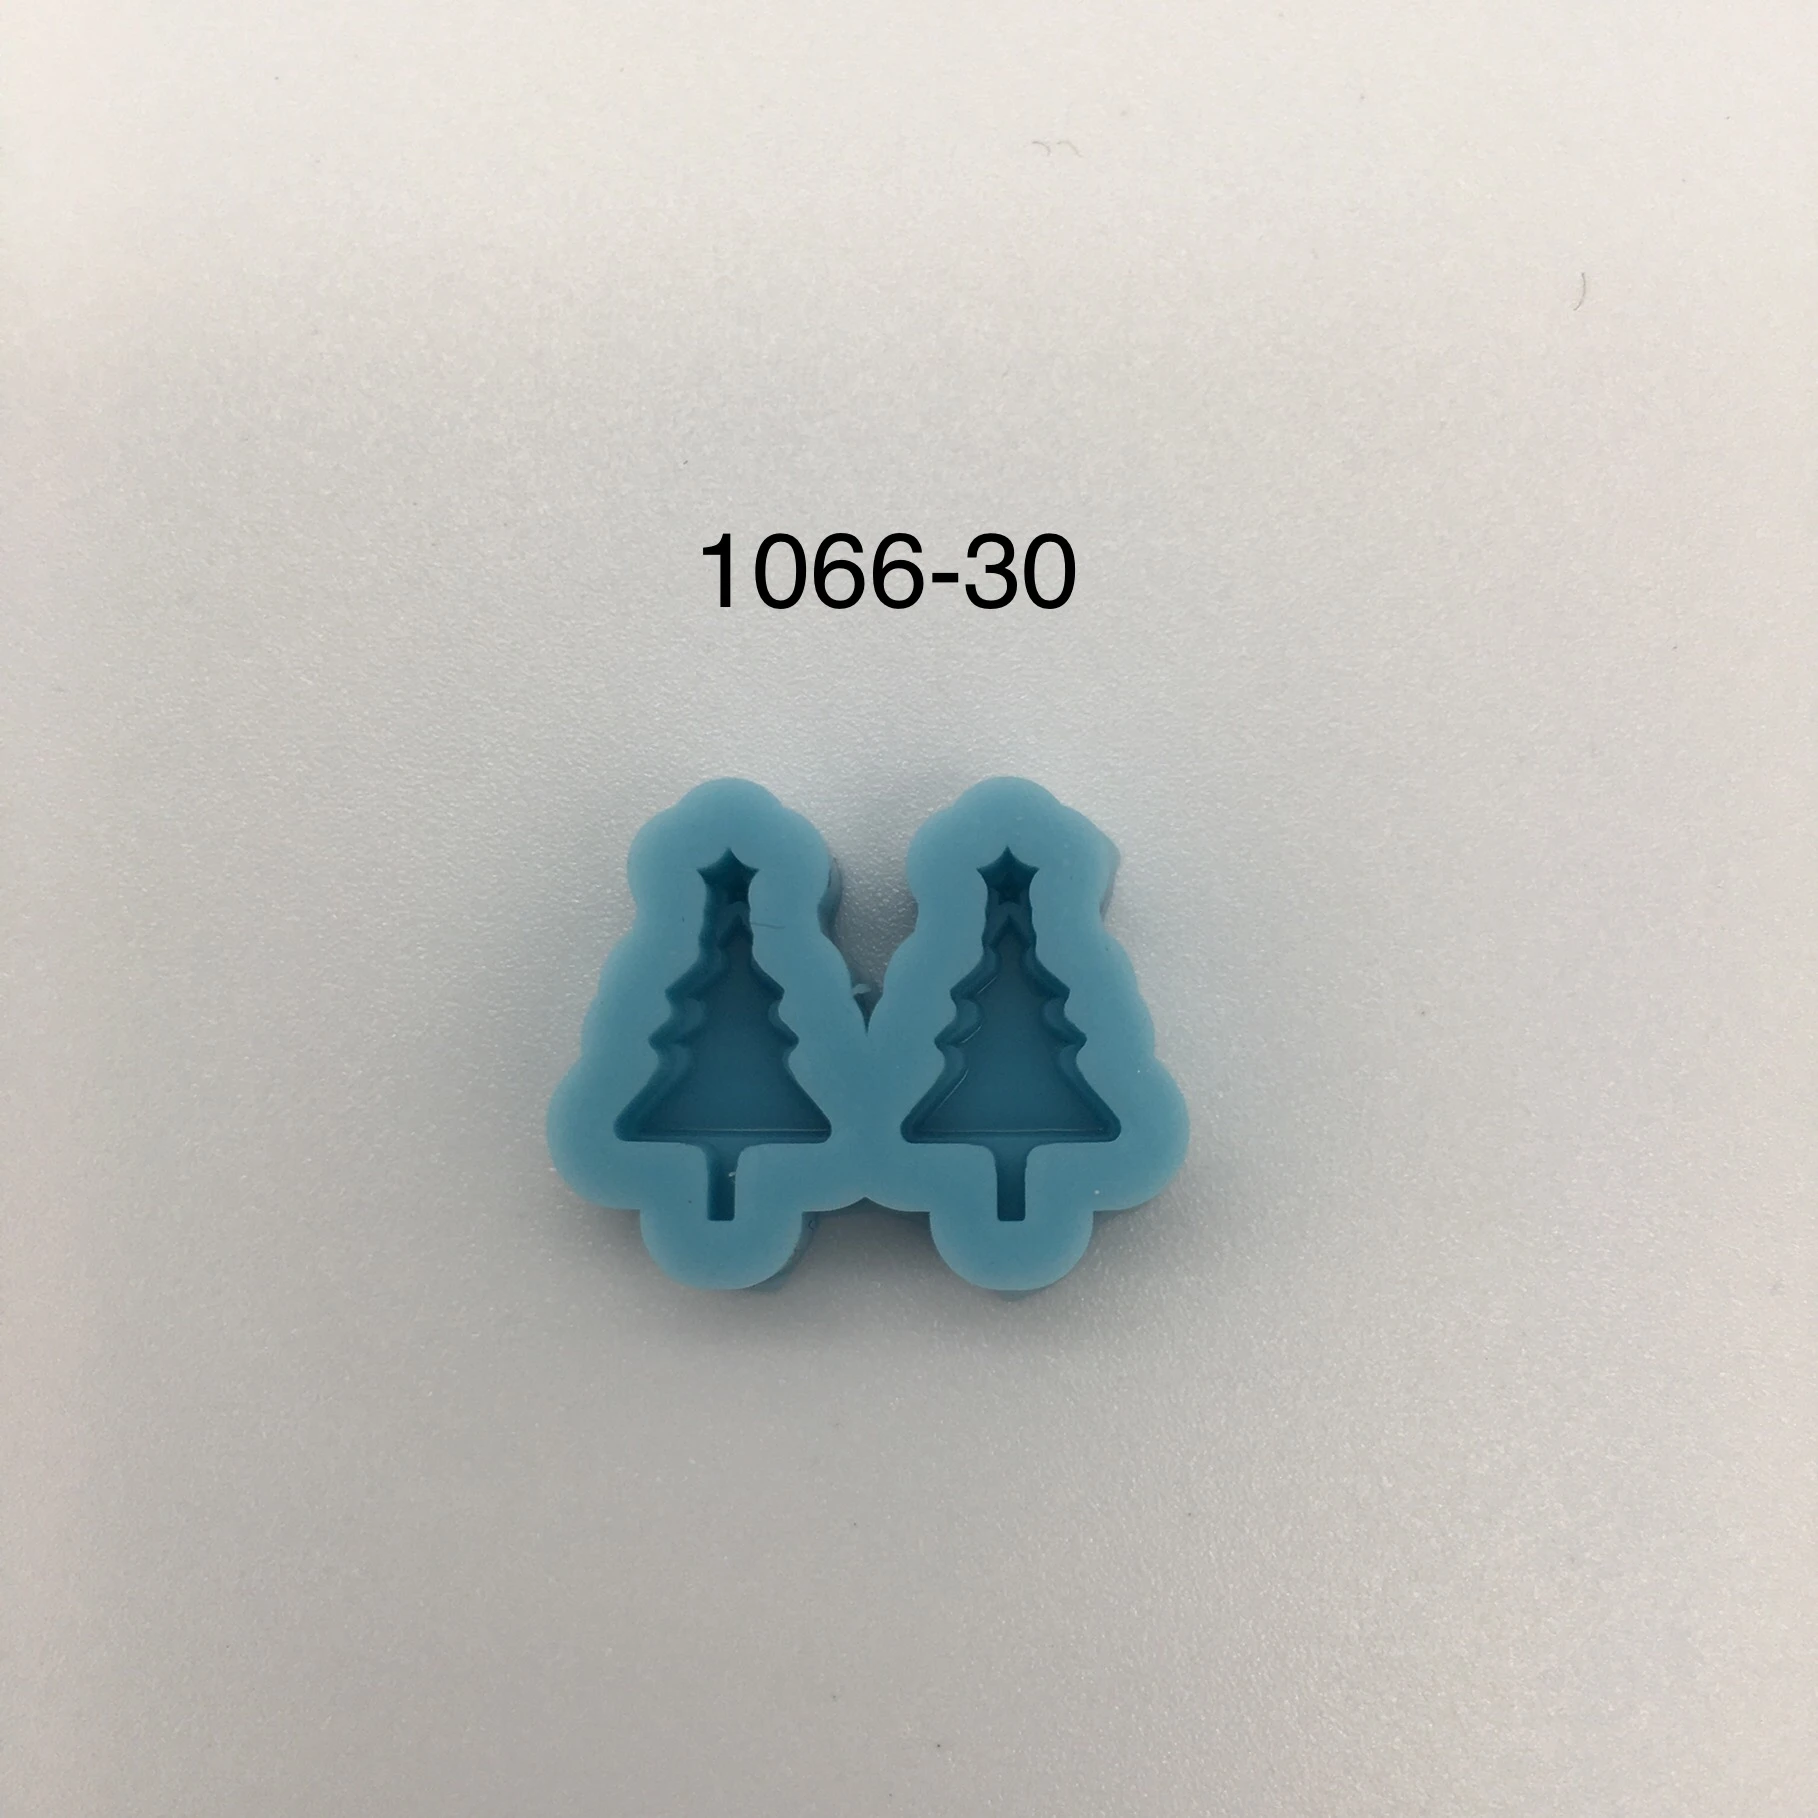 1066-30 earrings studs DIY  silicone resin mold